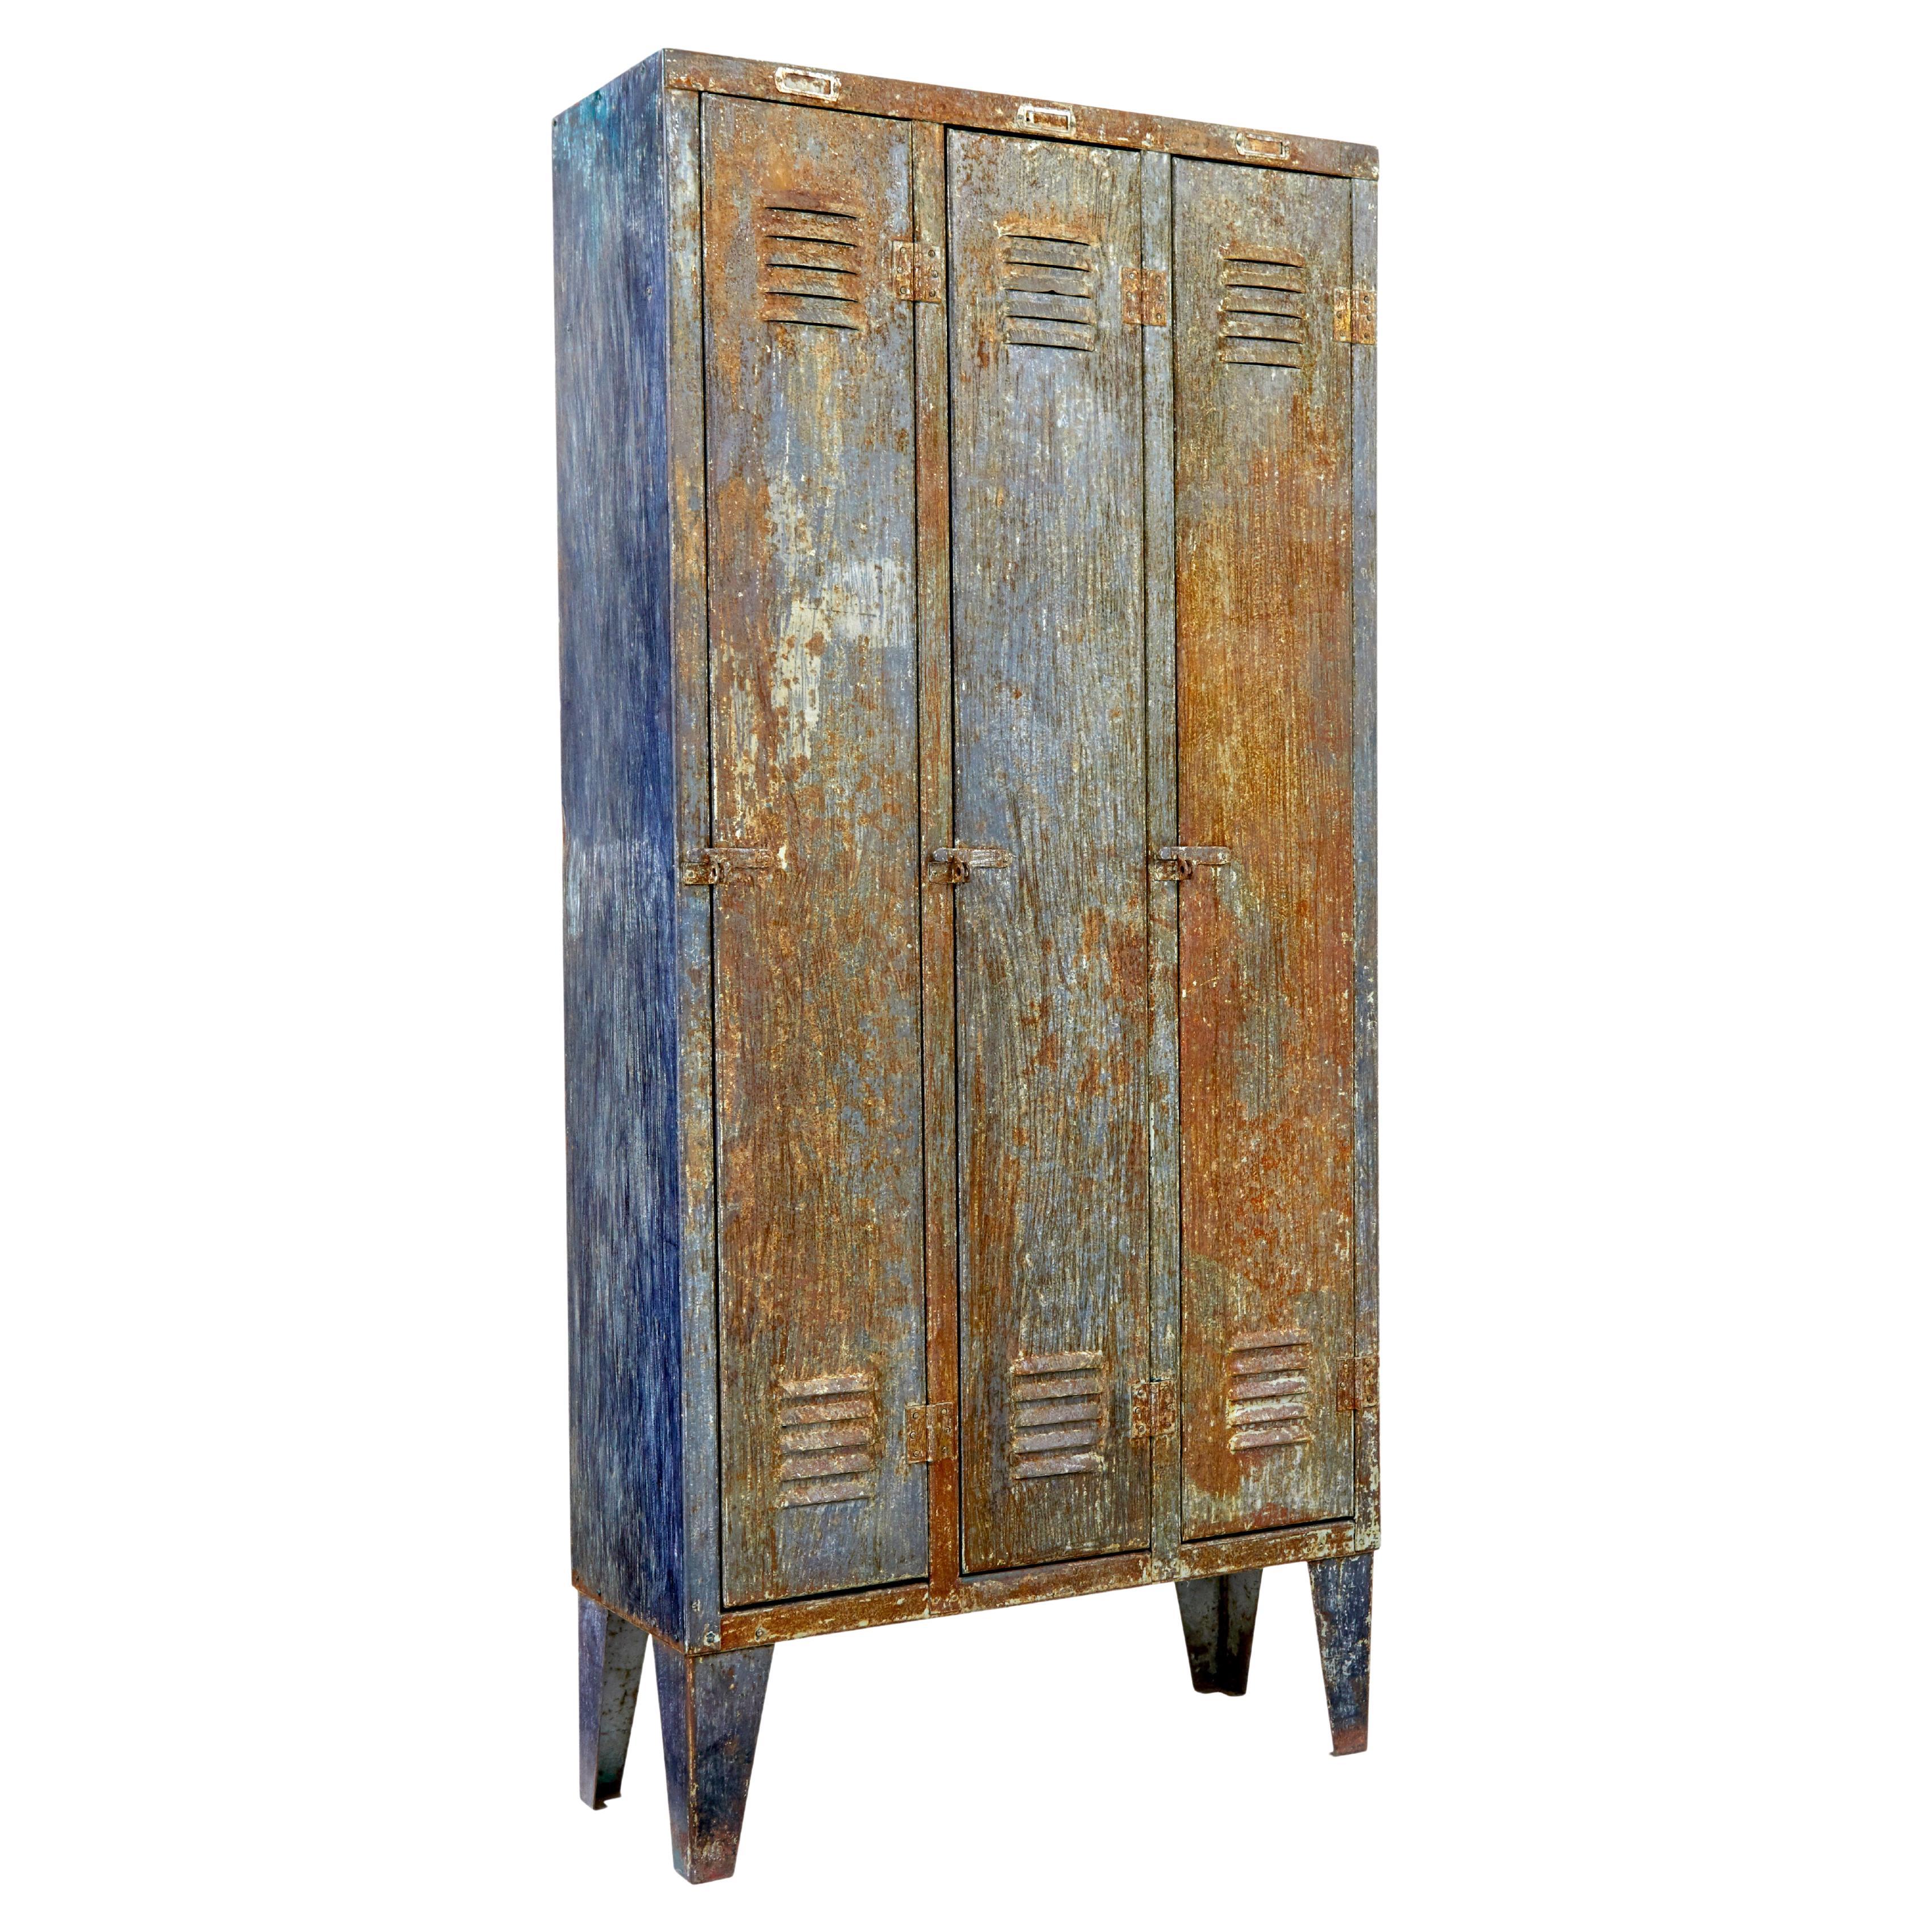 Mid 20th century distressed industrial cabinet For Sale